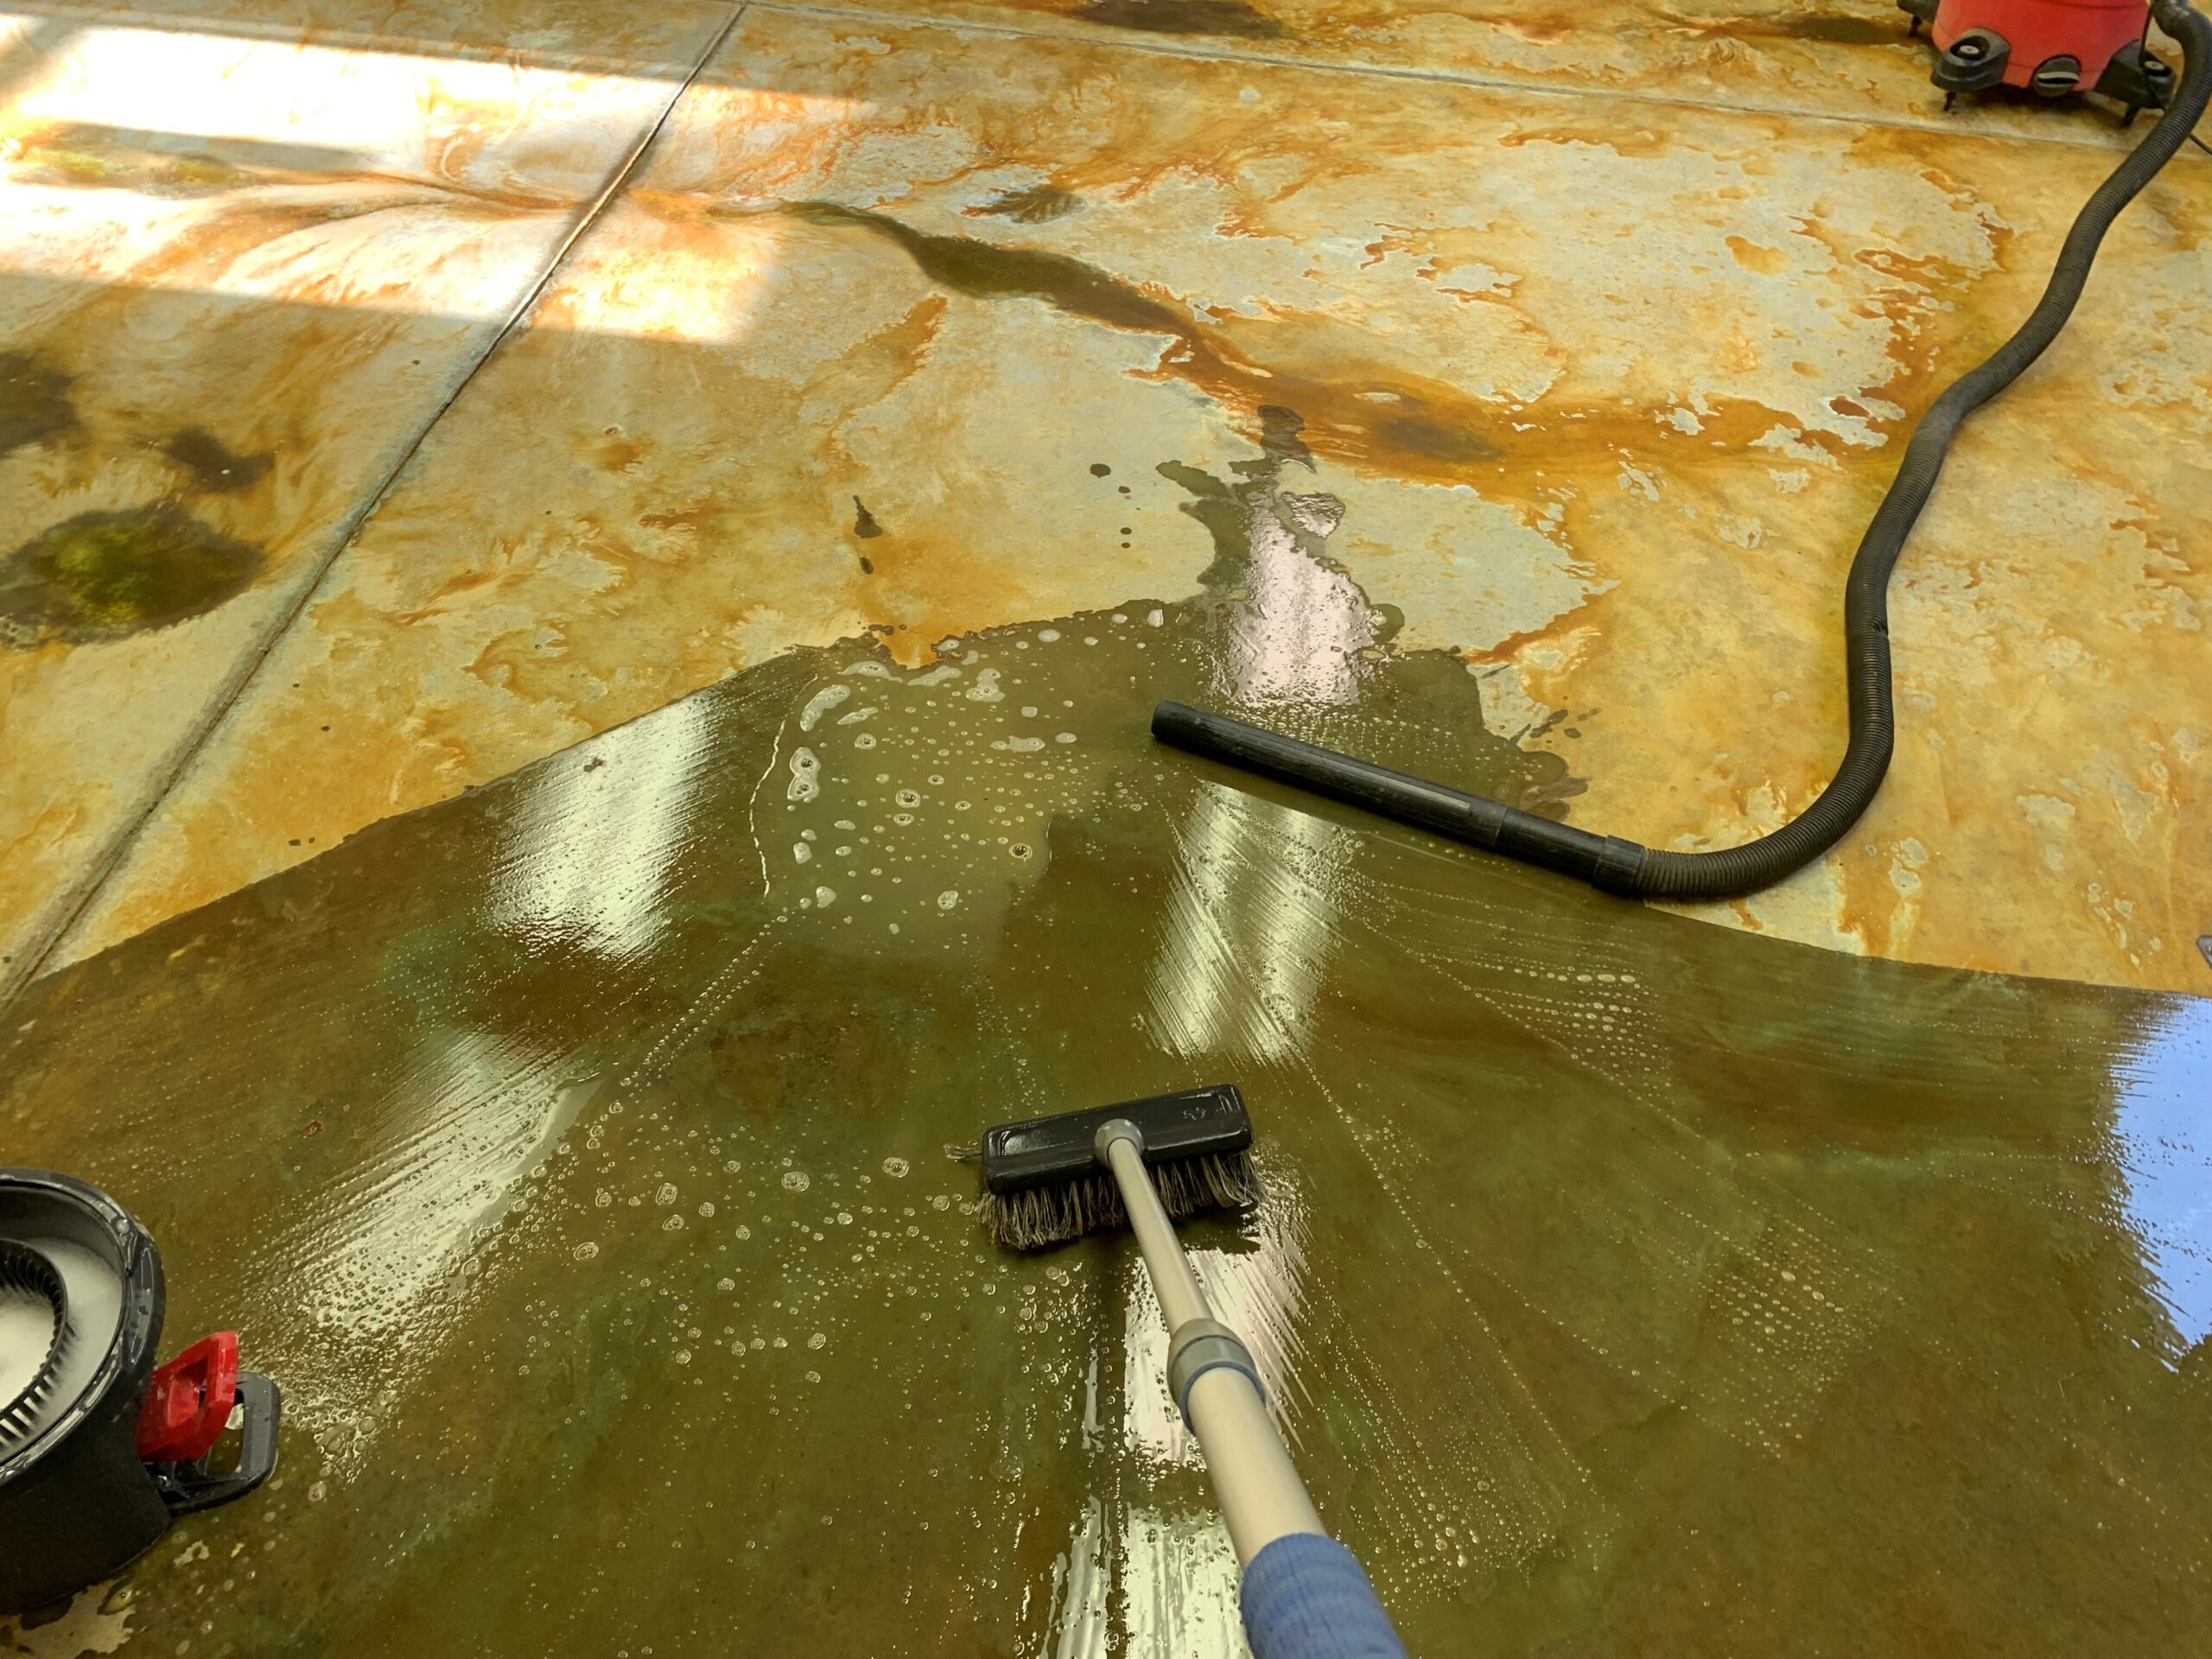 An image depicting the neutralizing and cleaning stage on a stained concrete floor